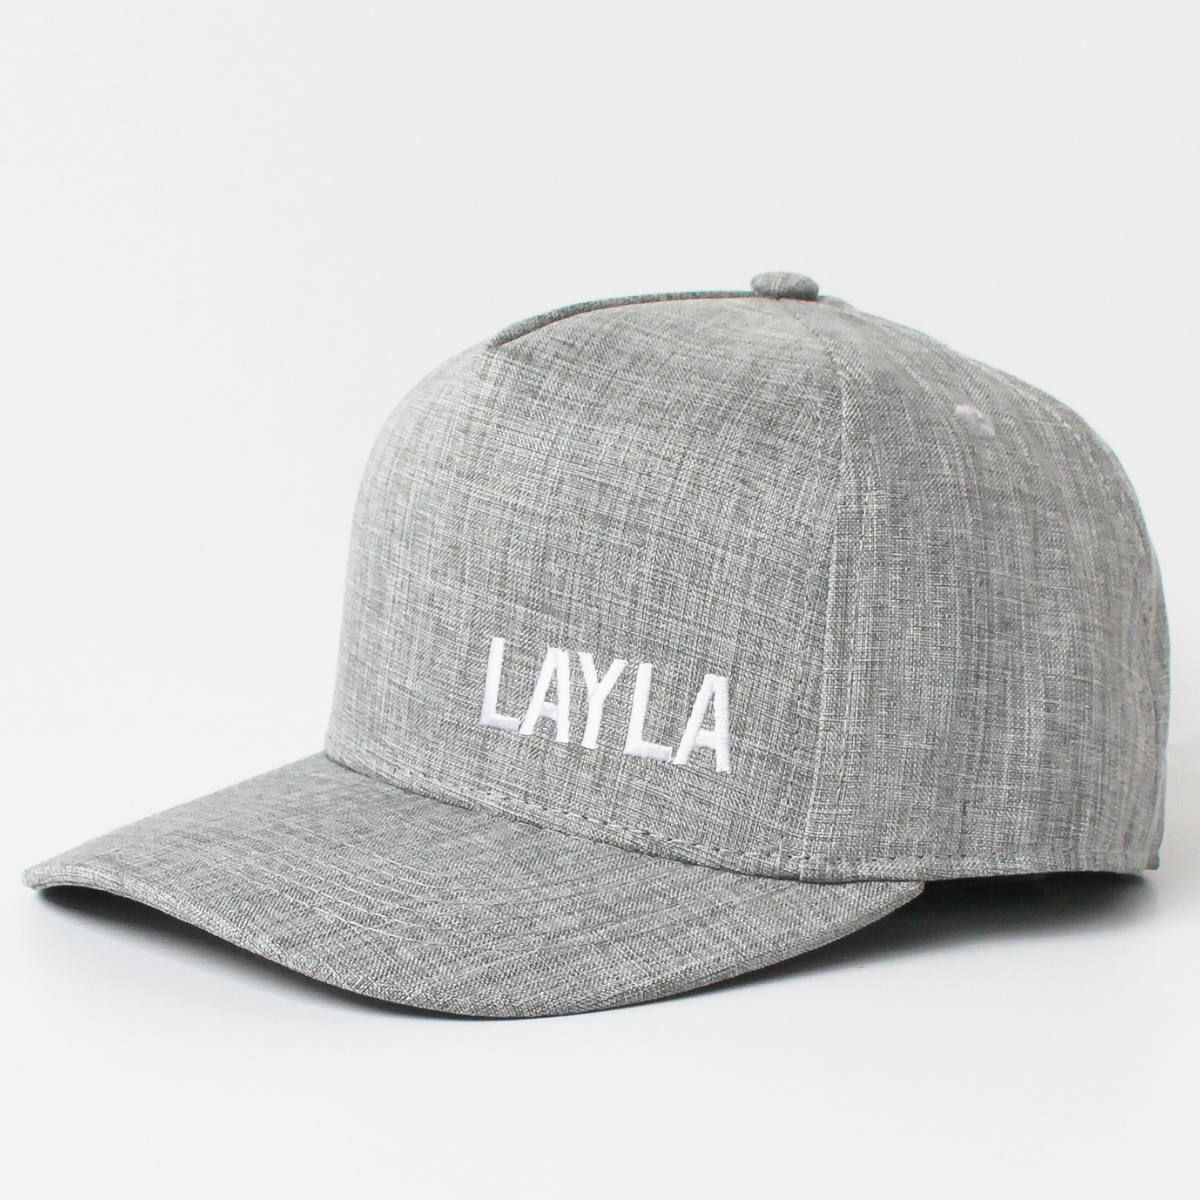 personalised customised grey snapback hat for kids and adults